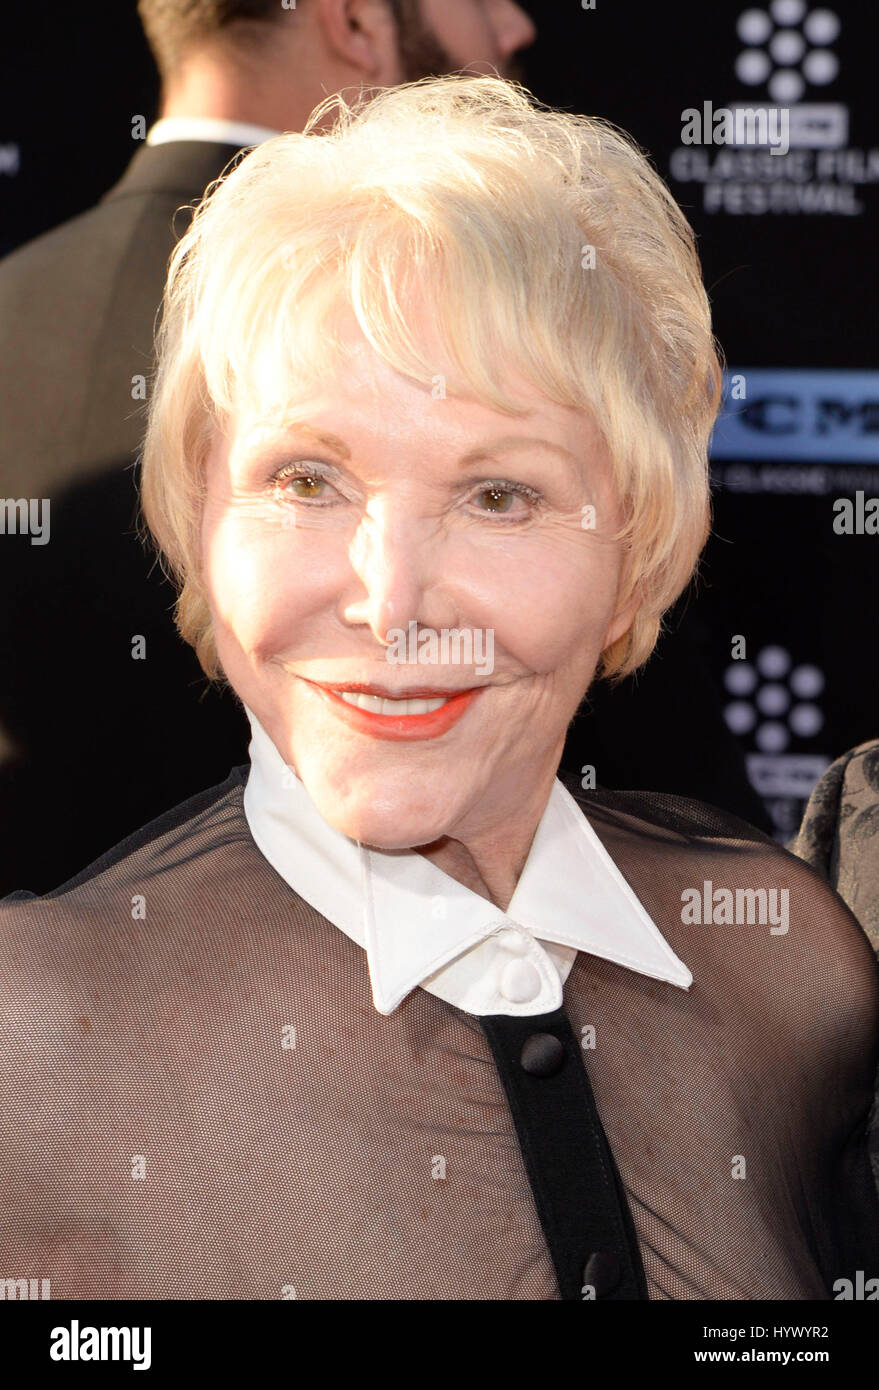 HOLLYWOOD, CA: Joan Benedict Steiger at The 50th Anniversary Screening of 'In the Heat of the Night' Opening Night Gala of the 2017 TCM Classic Film Festival at the TCL Chinese Theater in Hollywood, California on April 6, 2017 Credit: Koi Sojer/Snap'N U Photos/MediaPunch Stock Photo